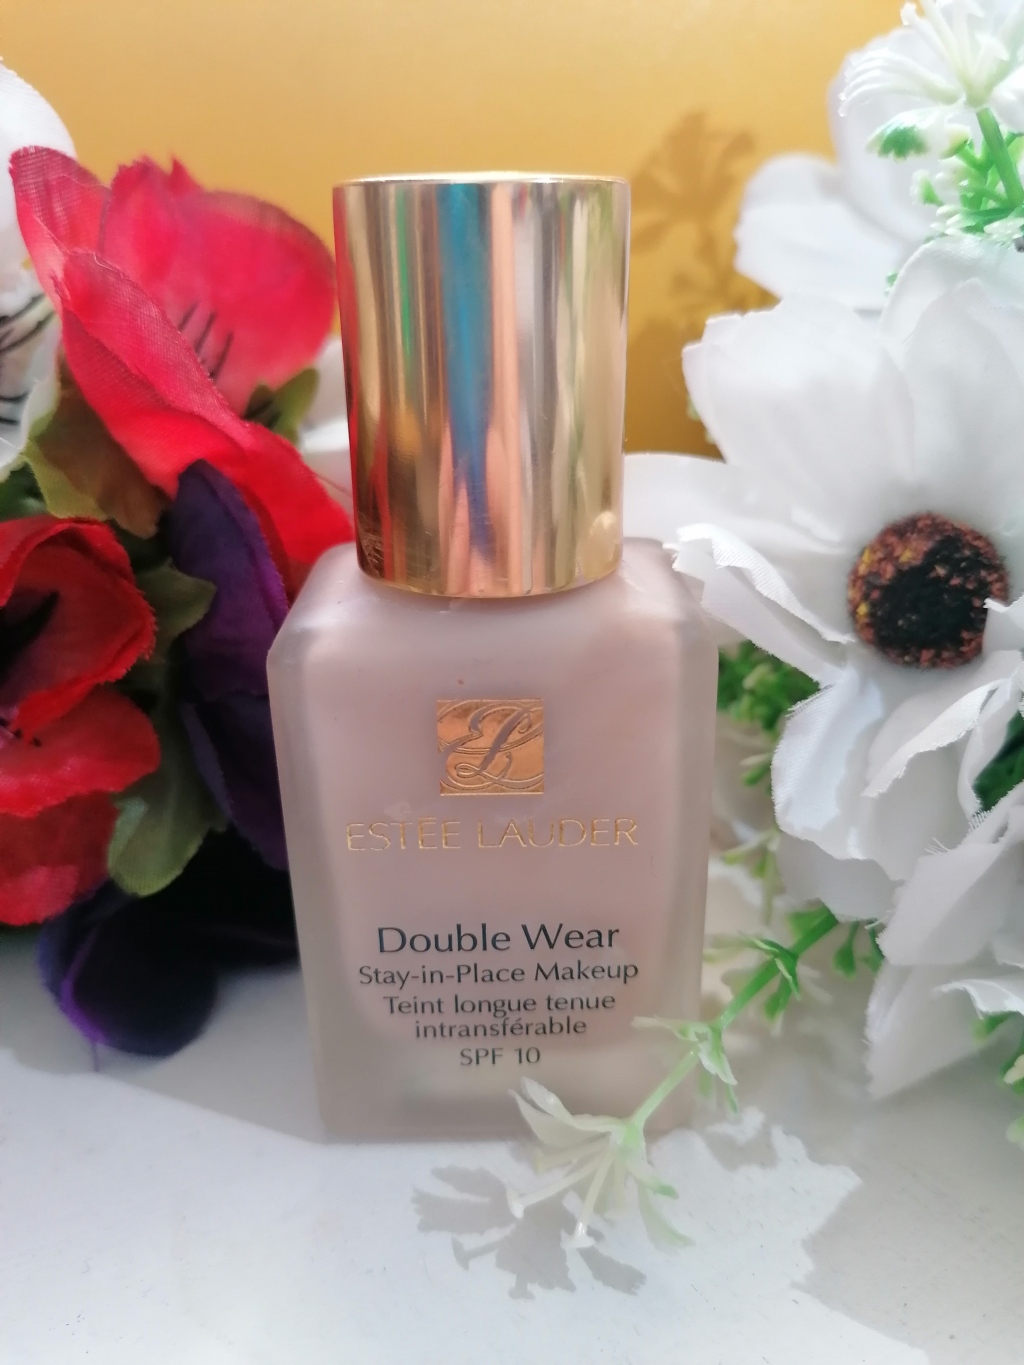 Estee Lauder Double Wear Foundation Review W/ before and after pics